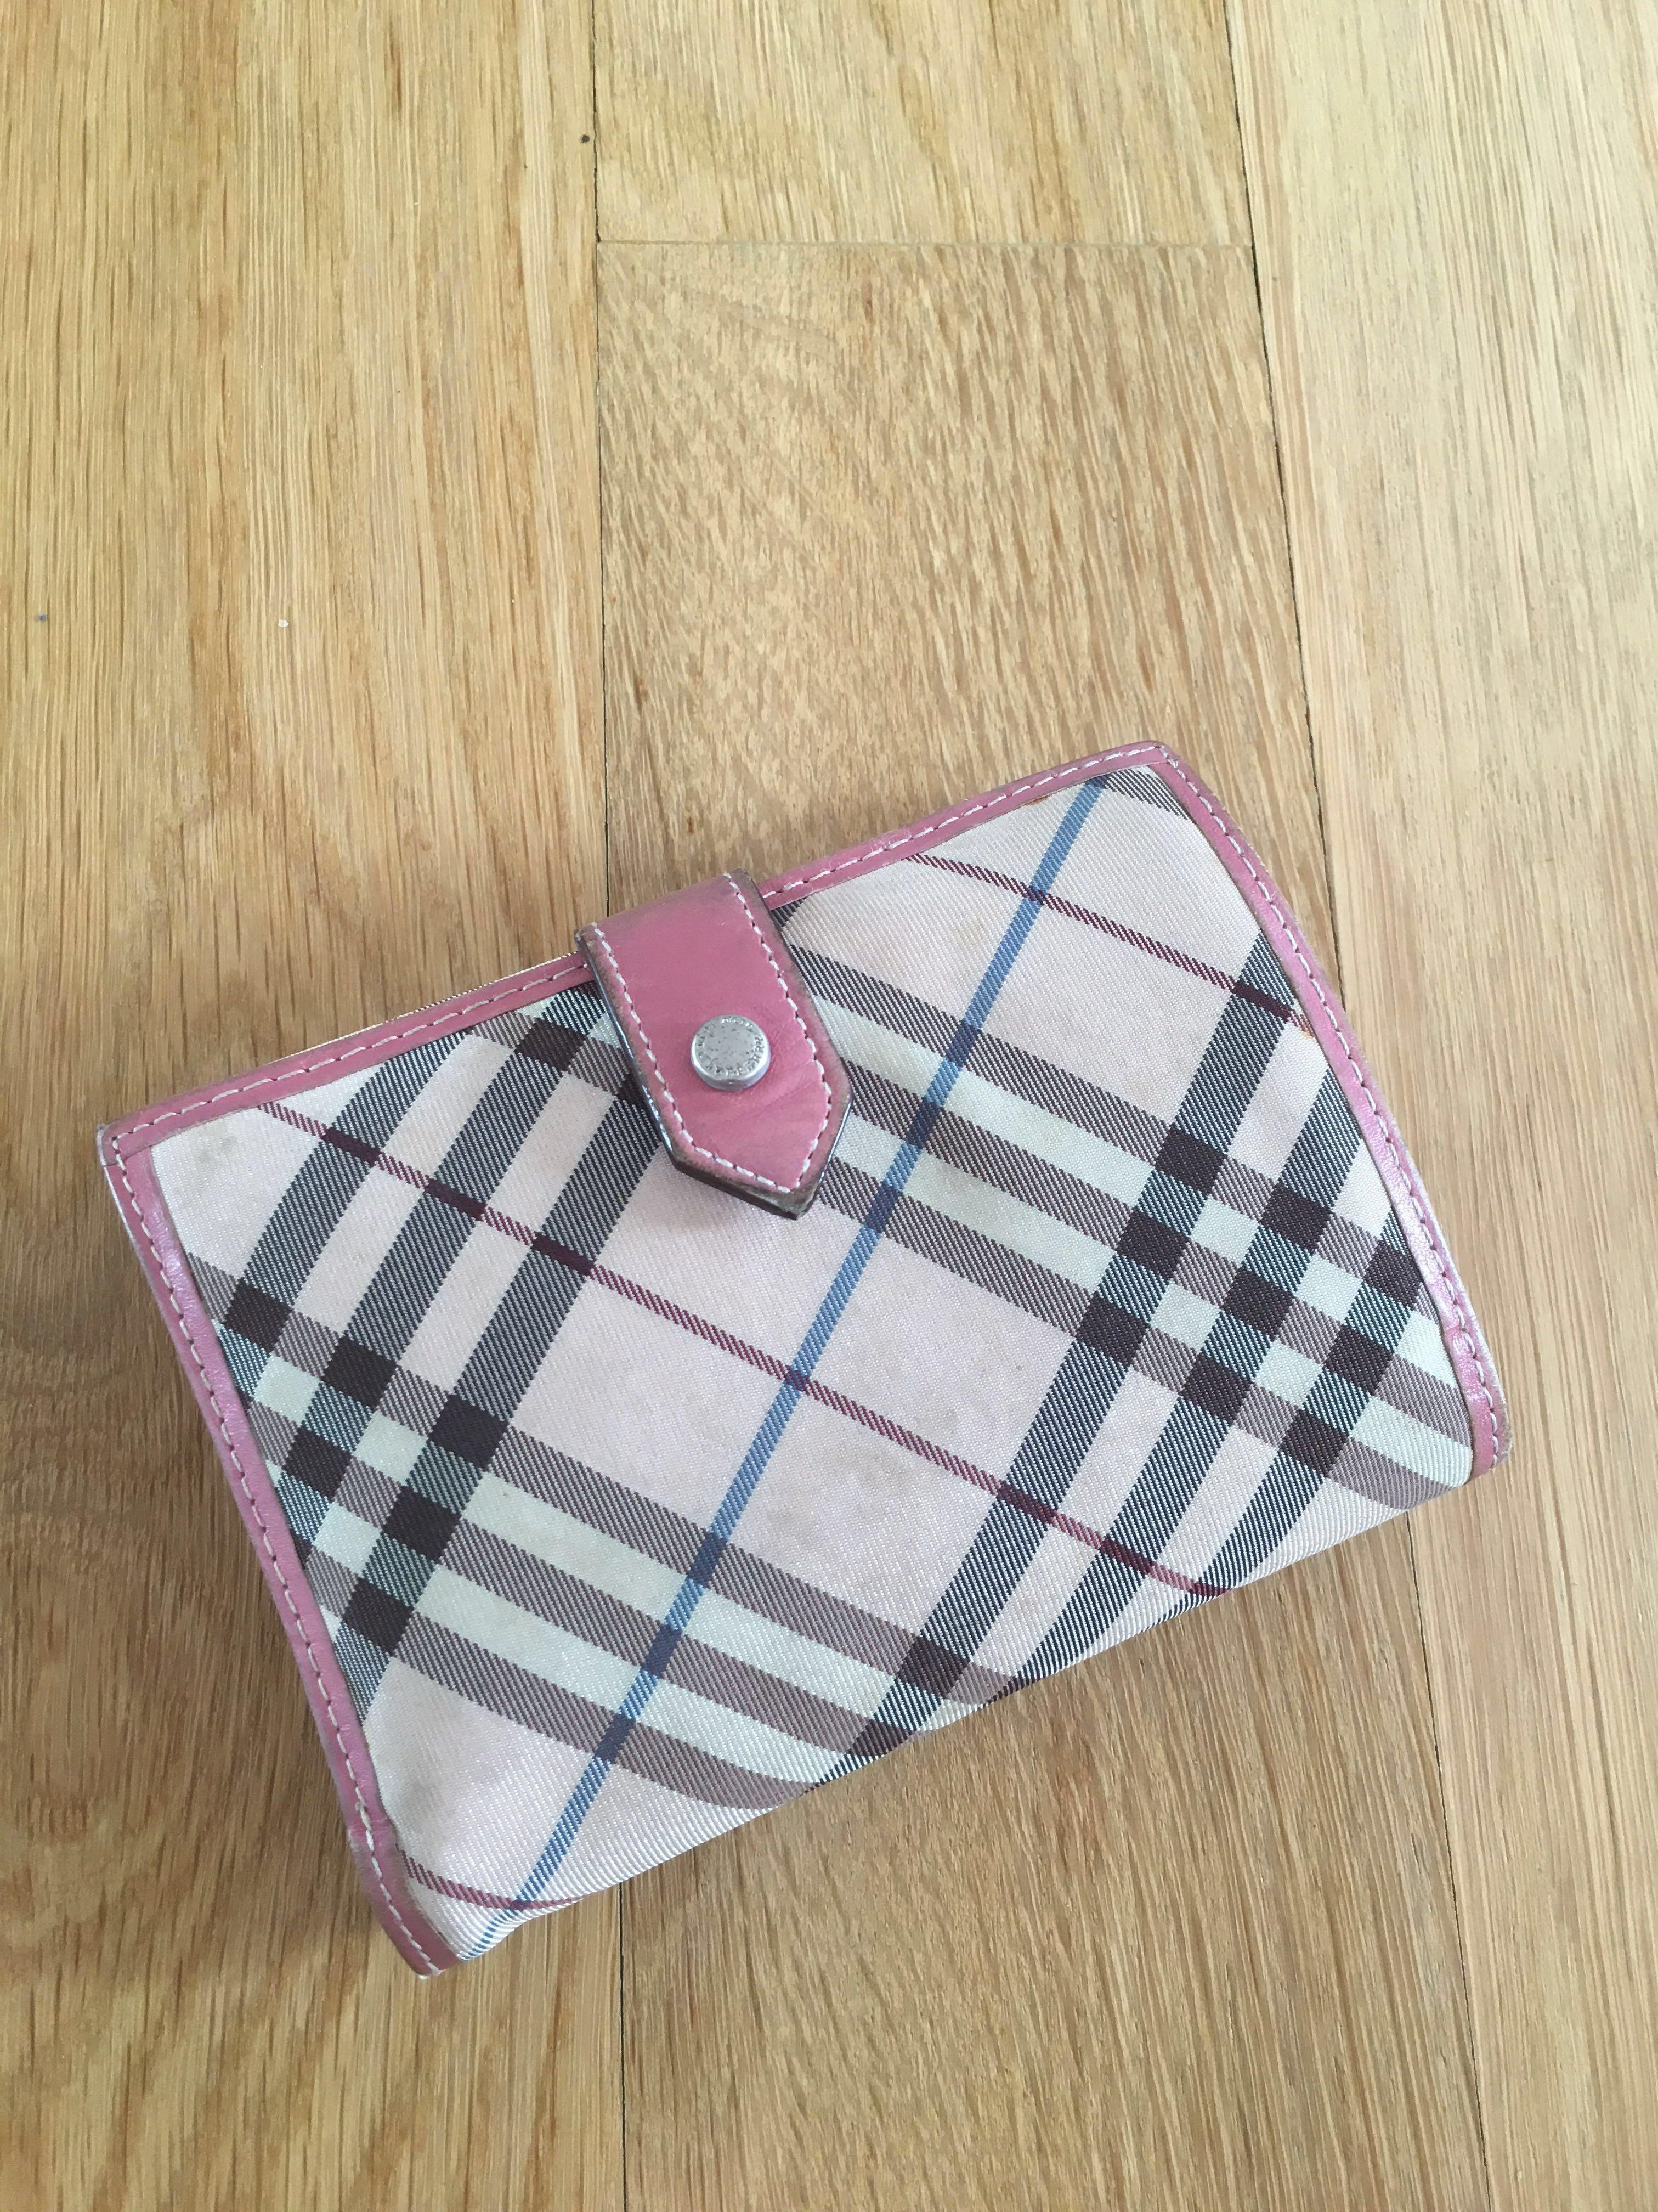 Burberry Blue Label limited edition pink wallet purse